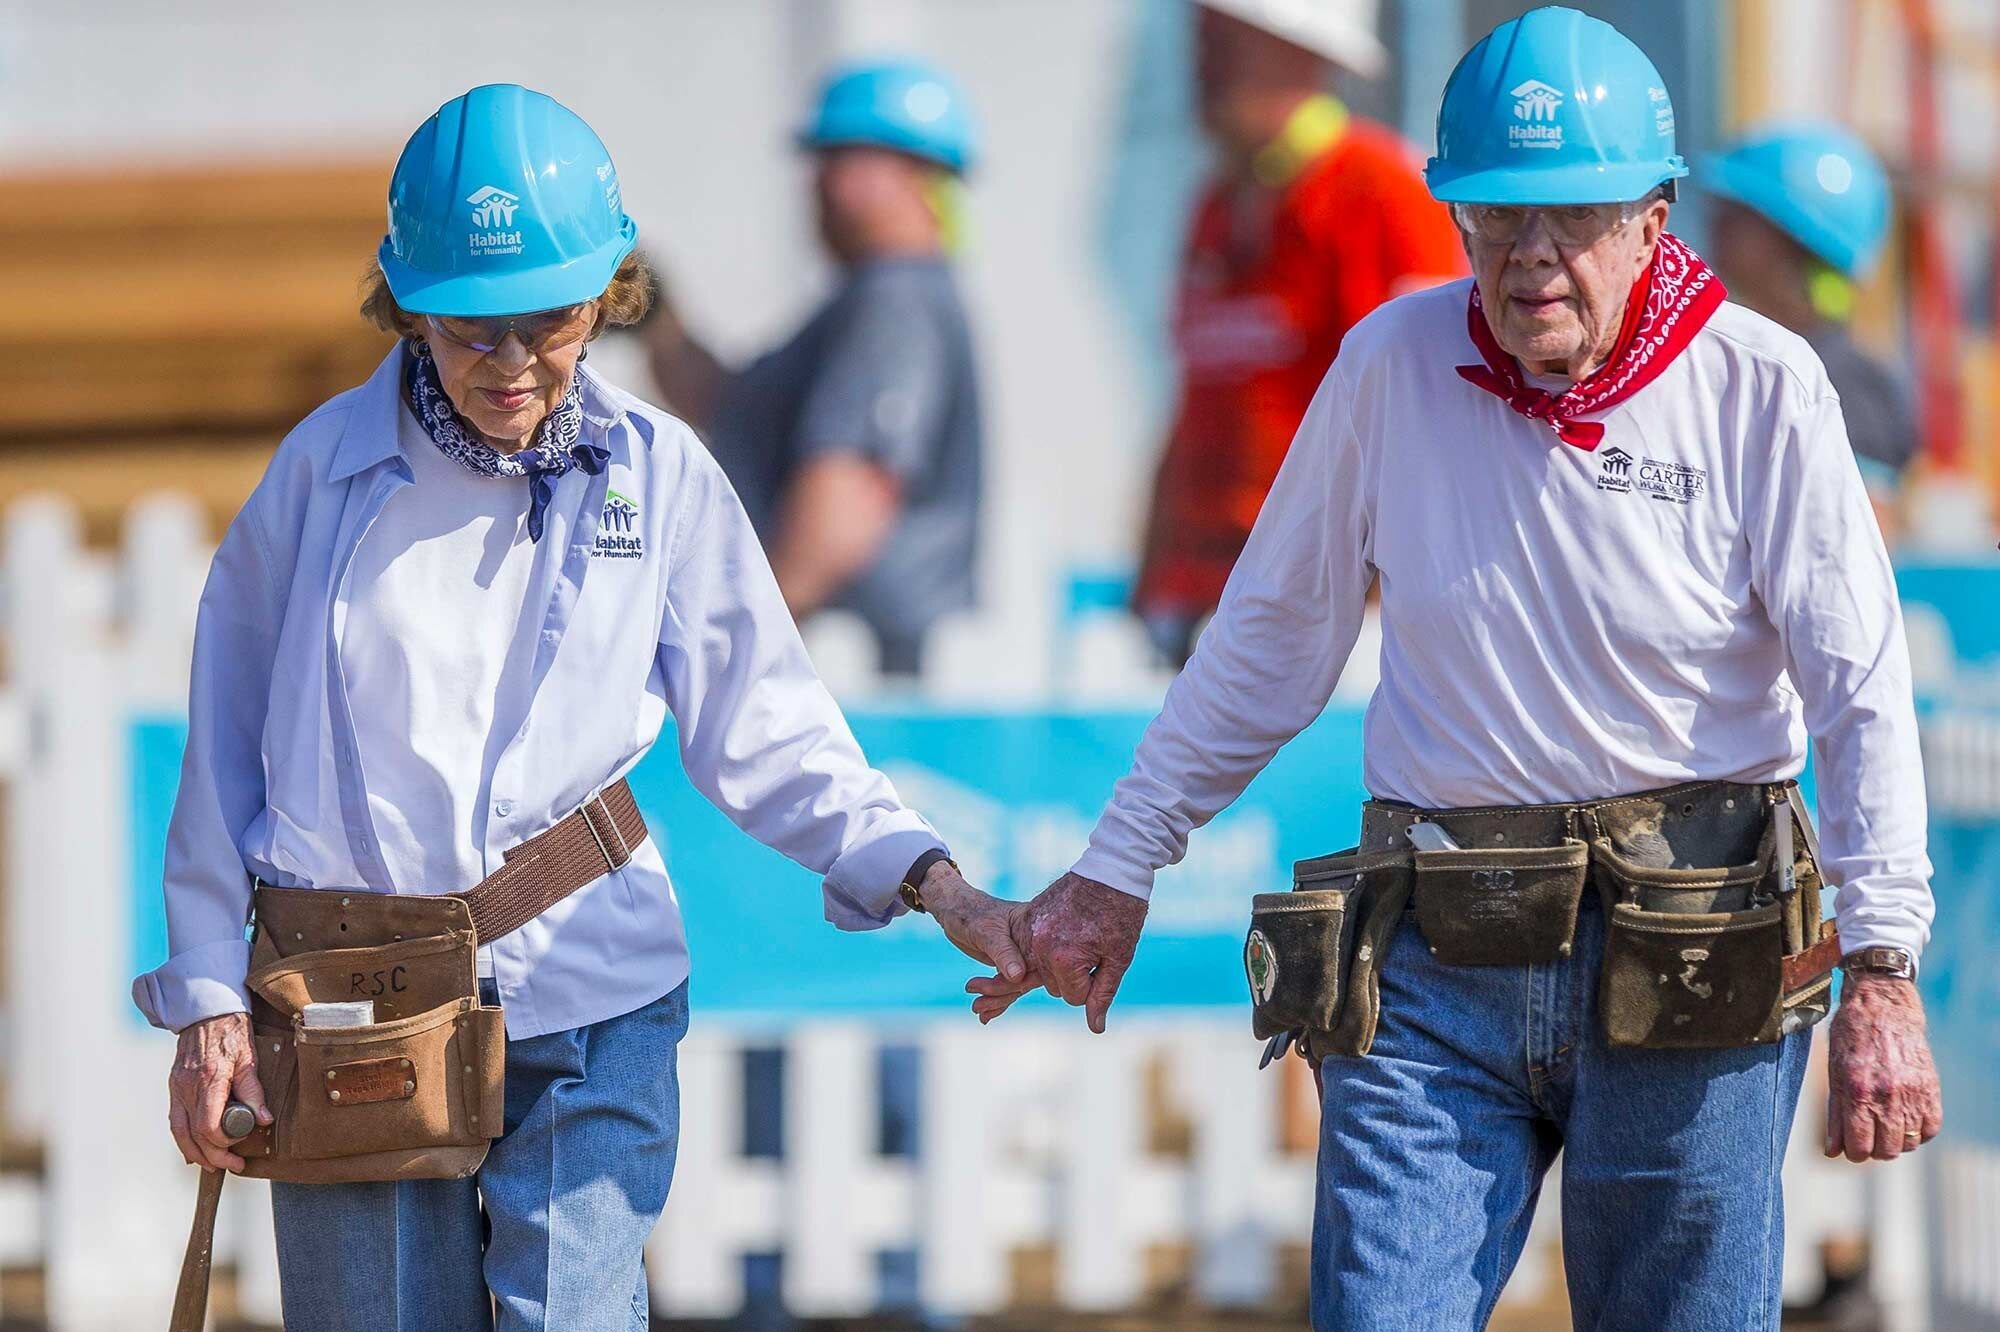 Rosalynn and Jimmy Carter, at age 94, building homes with Habitat for Humanity (photo Robert Franklin/AP/SIPA).